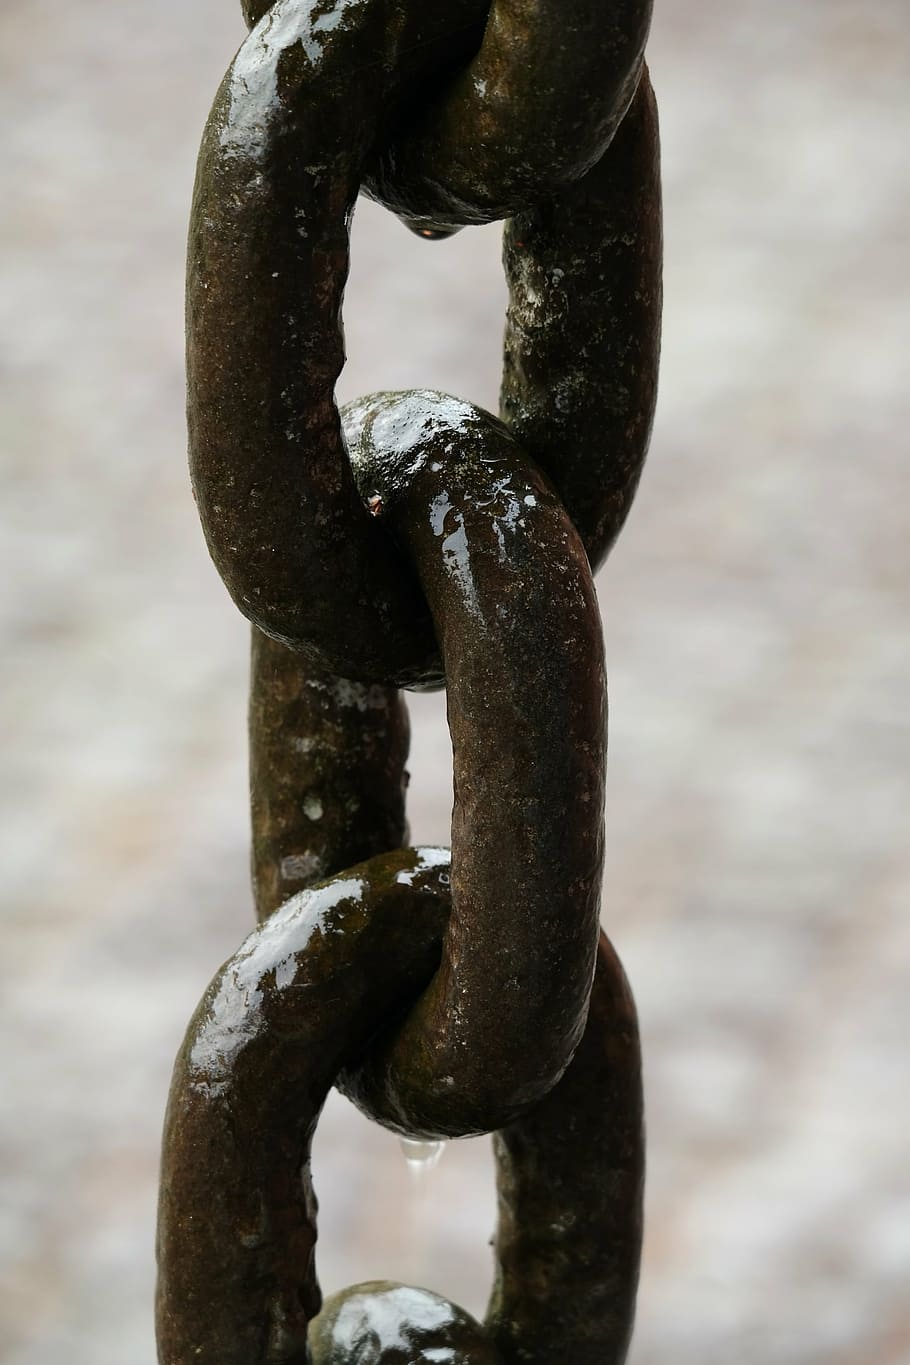 links of the chain, chain, iron, metal, connection, members, metal chain, together, shiny, wet